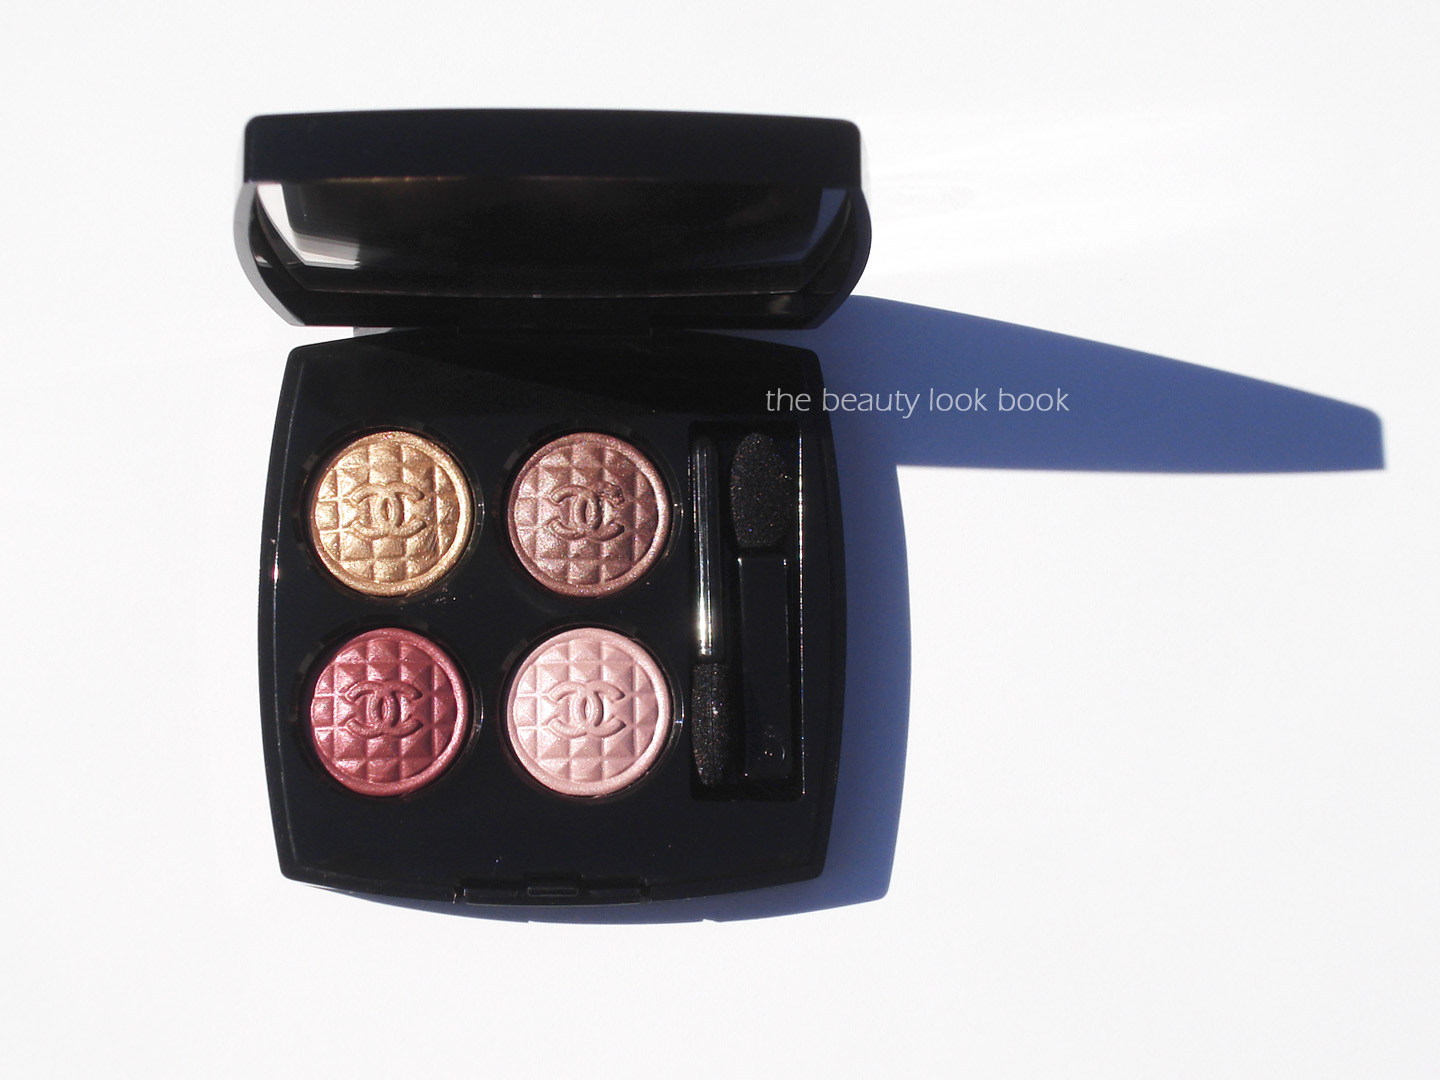 Chanel Lumiere et Opulence (342) Les 4 Ombres Multi-Effect Quadra Eyeshadow  Review & Swatches